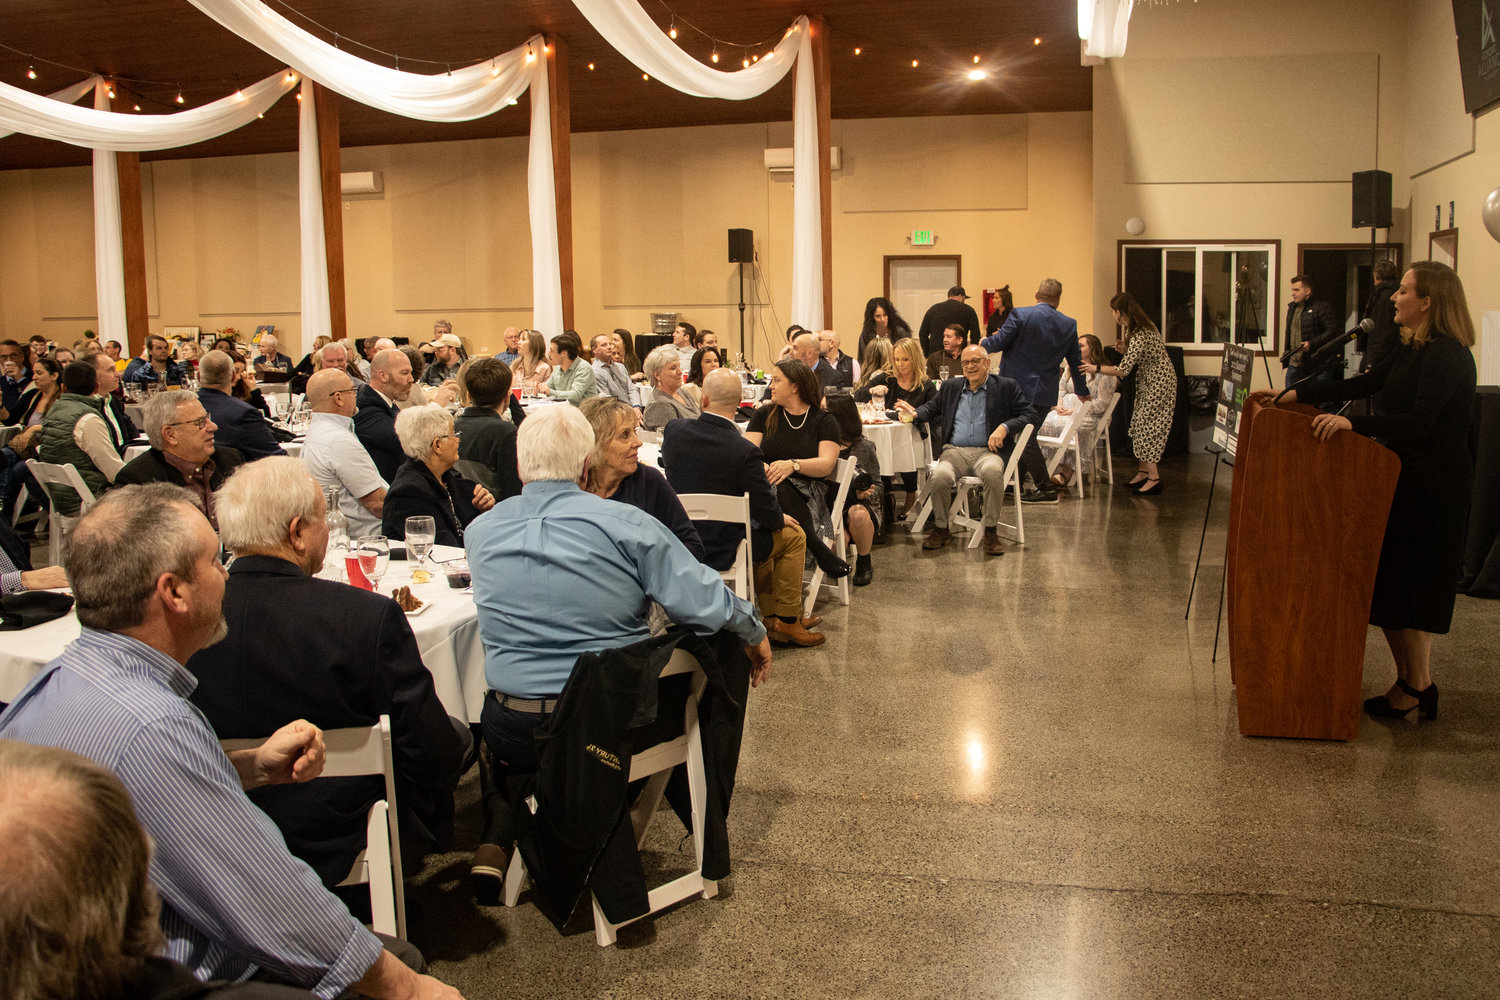 Former Fox 13 of Seattle reporter Brandi Kruse delivers her keynote speech Friday night at the Economic Alliance of Lewis County's 40th annual banquet at Jesters Auto Museum & Event Center in Chehalis.